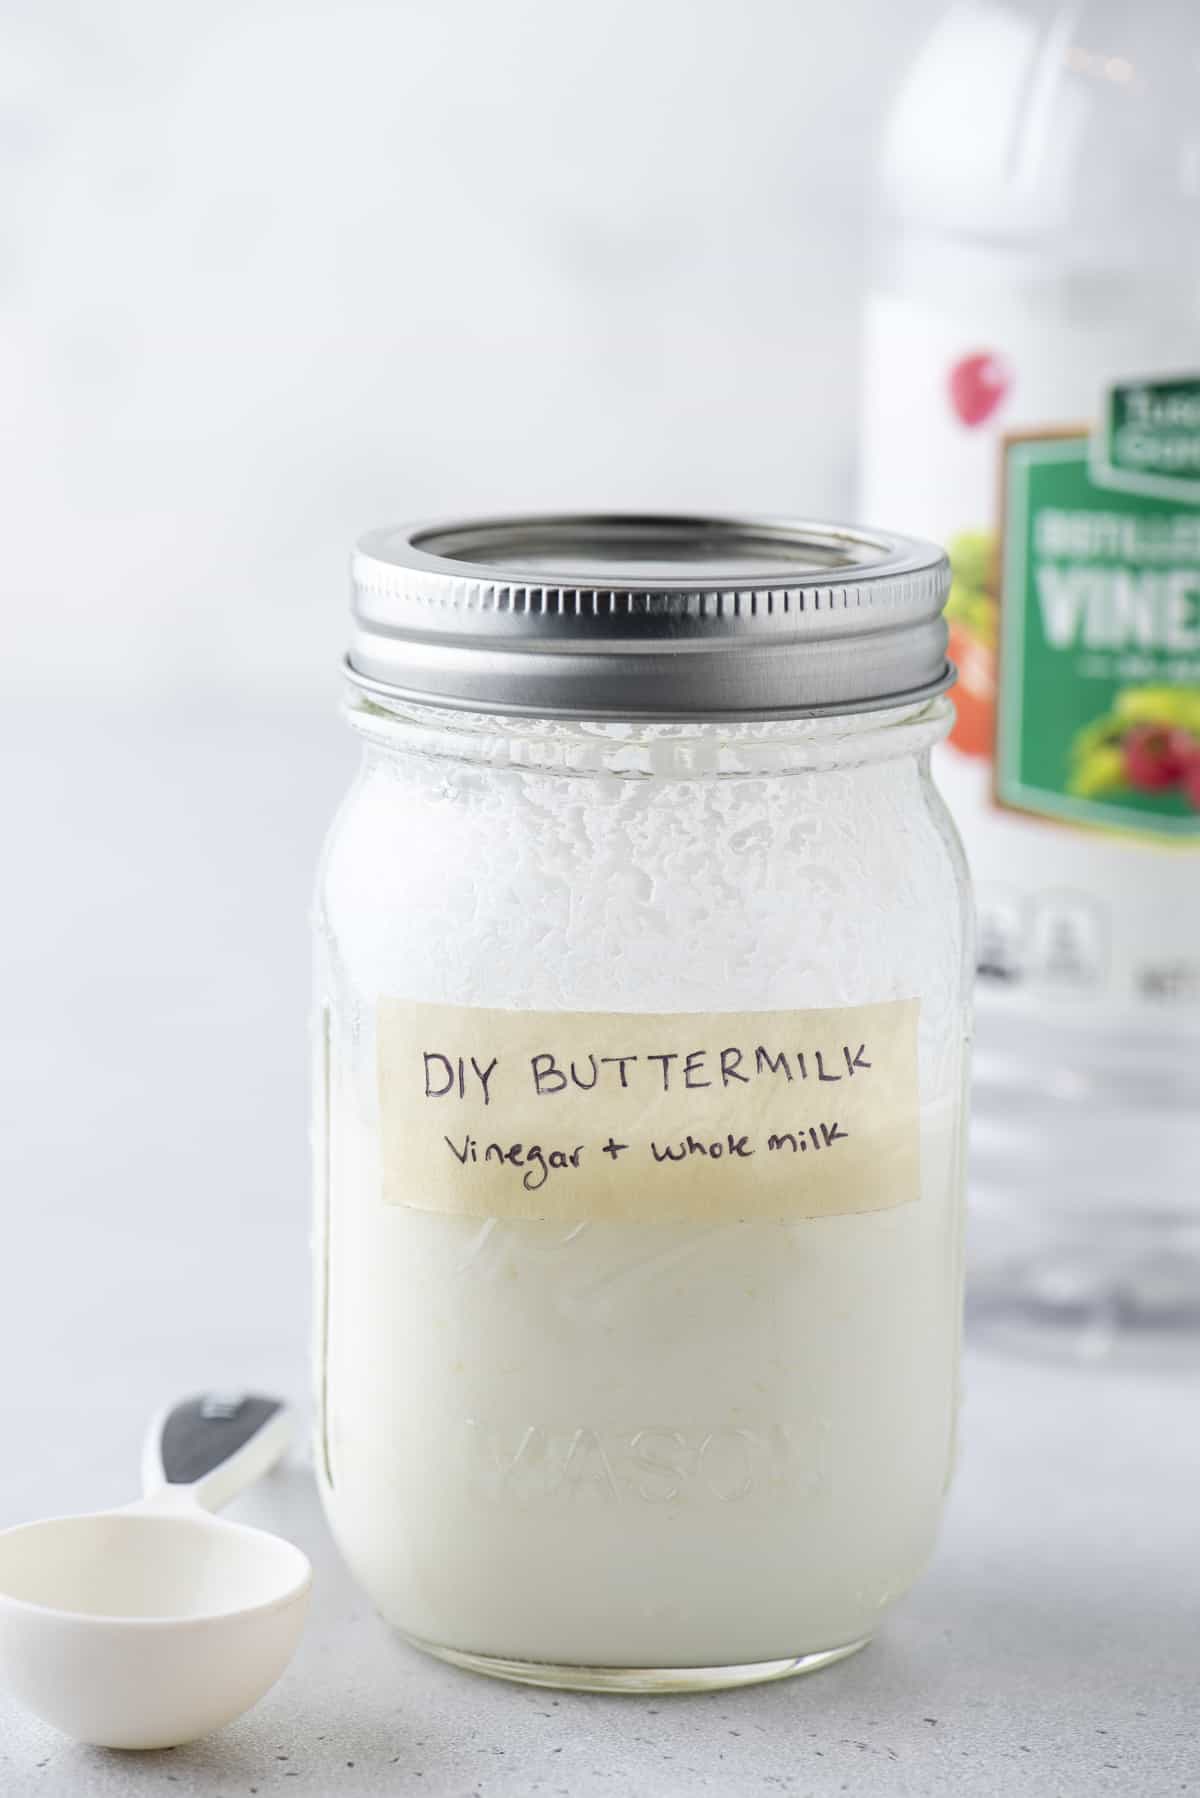 a mason jar full of buttermilk with a lid on, labeled with tape that says "DIY Buttermilk: vinegar + whole milk", with a measuring spoon beside it an a bottle of vinegar in the background